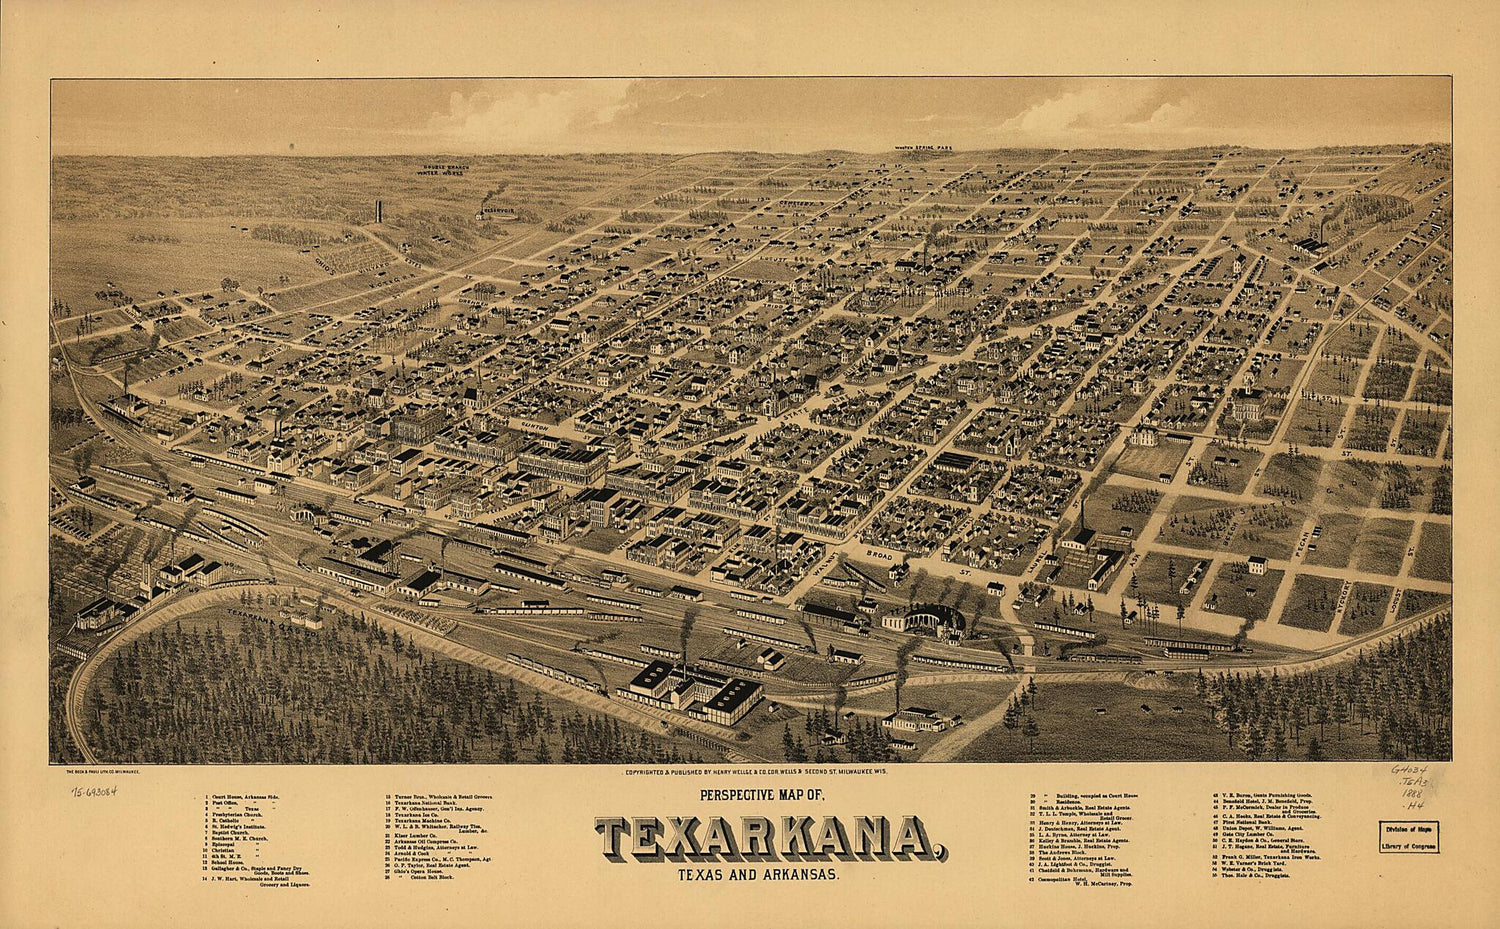 This old map of Perspective Map Of, Texarkana, Texas and Arkansas from 1888 was created by  Beck &amp; Pauli,  Henry Wellge &amp; Co in 1888